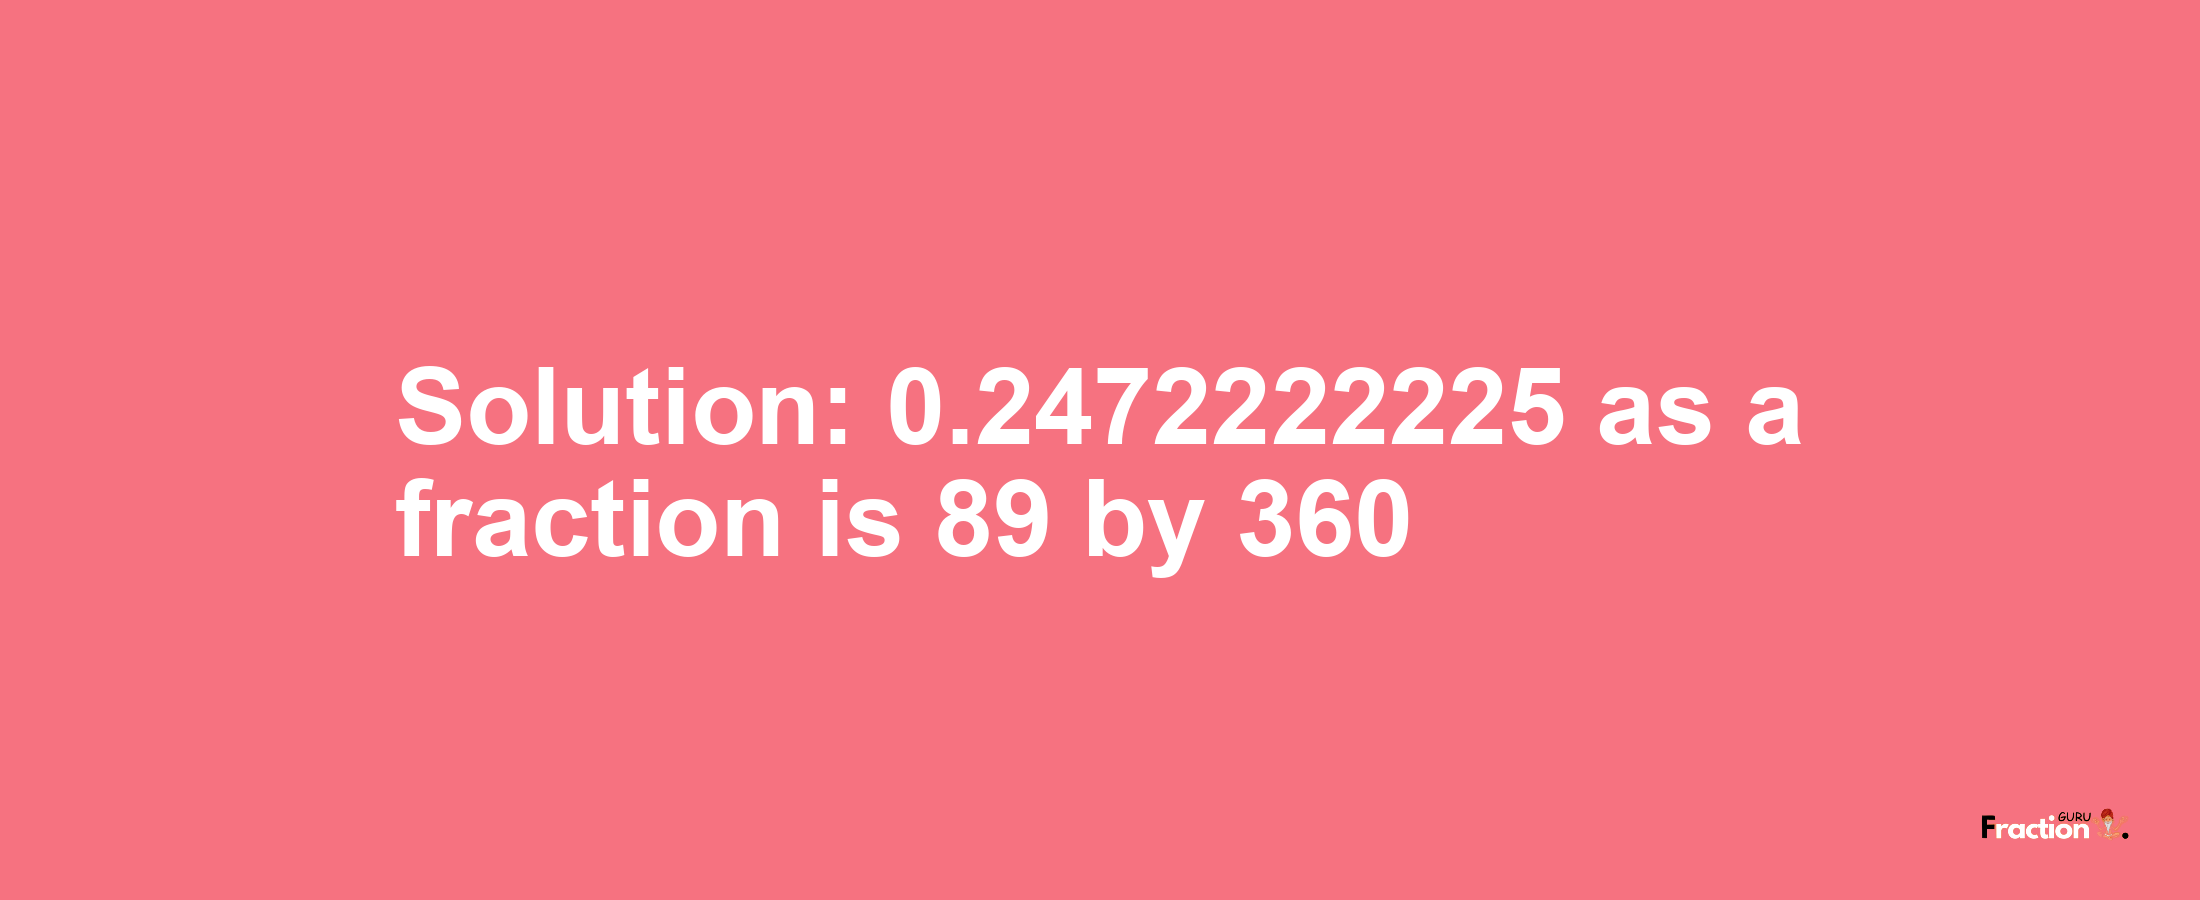 Solution:0.2472222225 as a fraction is 89/360